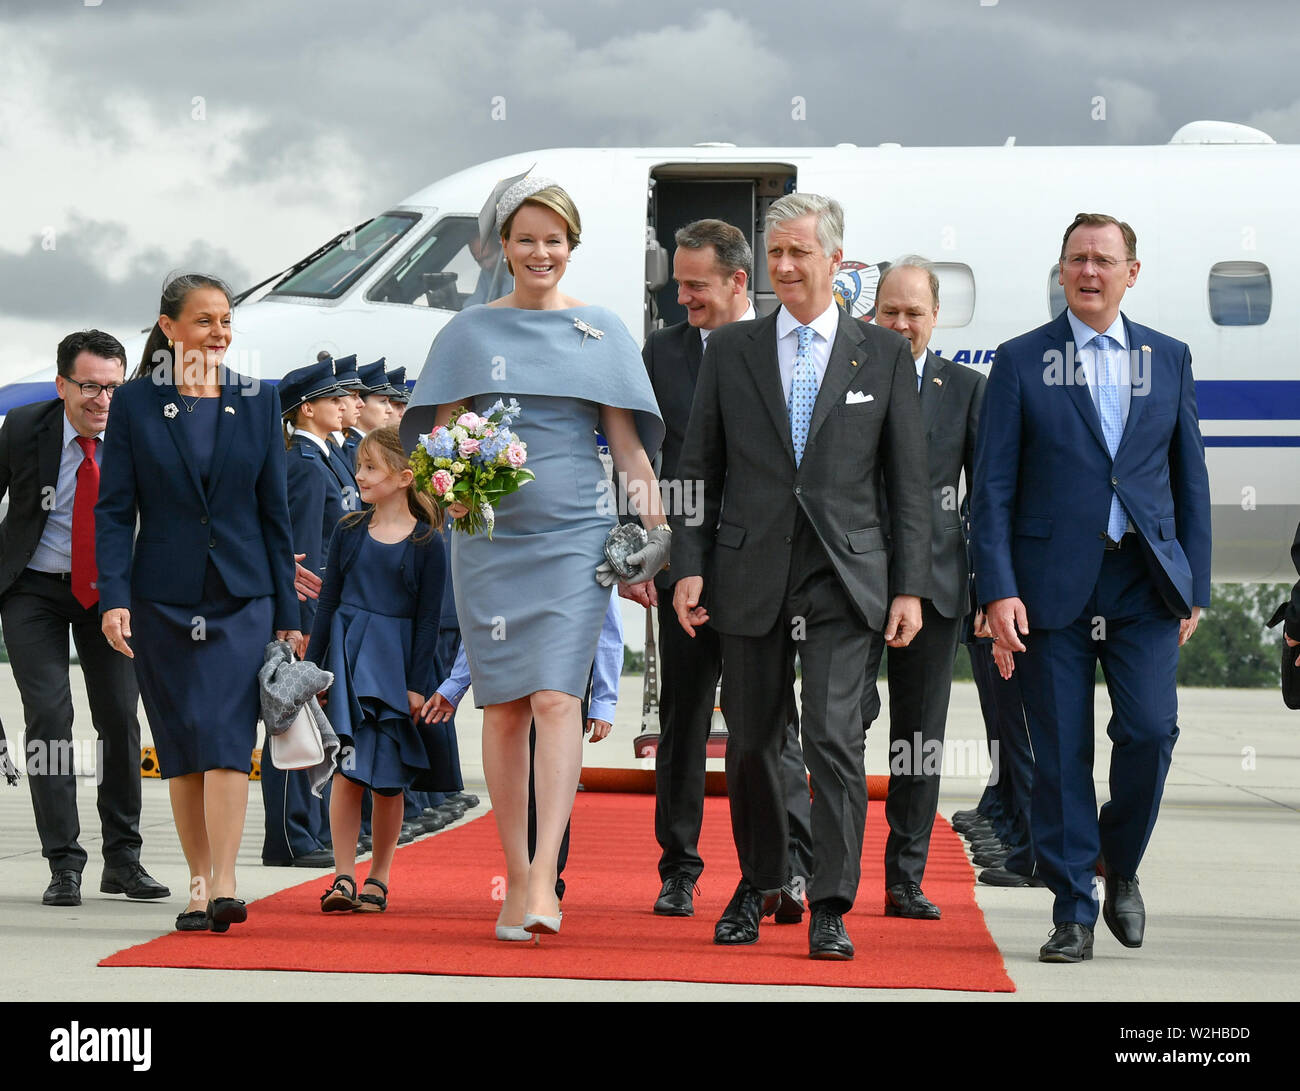 Erfurt, Germany. 09th July, 2019. The Belgian royal couple King Philippe and Queen Mathilde arrive at Erfurt-Weimar airport and are received by Bodo Ramelow (r), Prime Minister of Thuringia, and his wife Germana Alberti from the court (l). The royal couple visits Thuringia and Saxony-Anhalt on a two-day journey. Credit: Jens Kalaene/dpa-Zentralbild/dpa/Alamy Live News Stock Photo